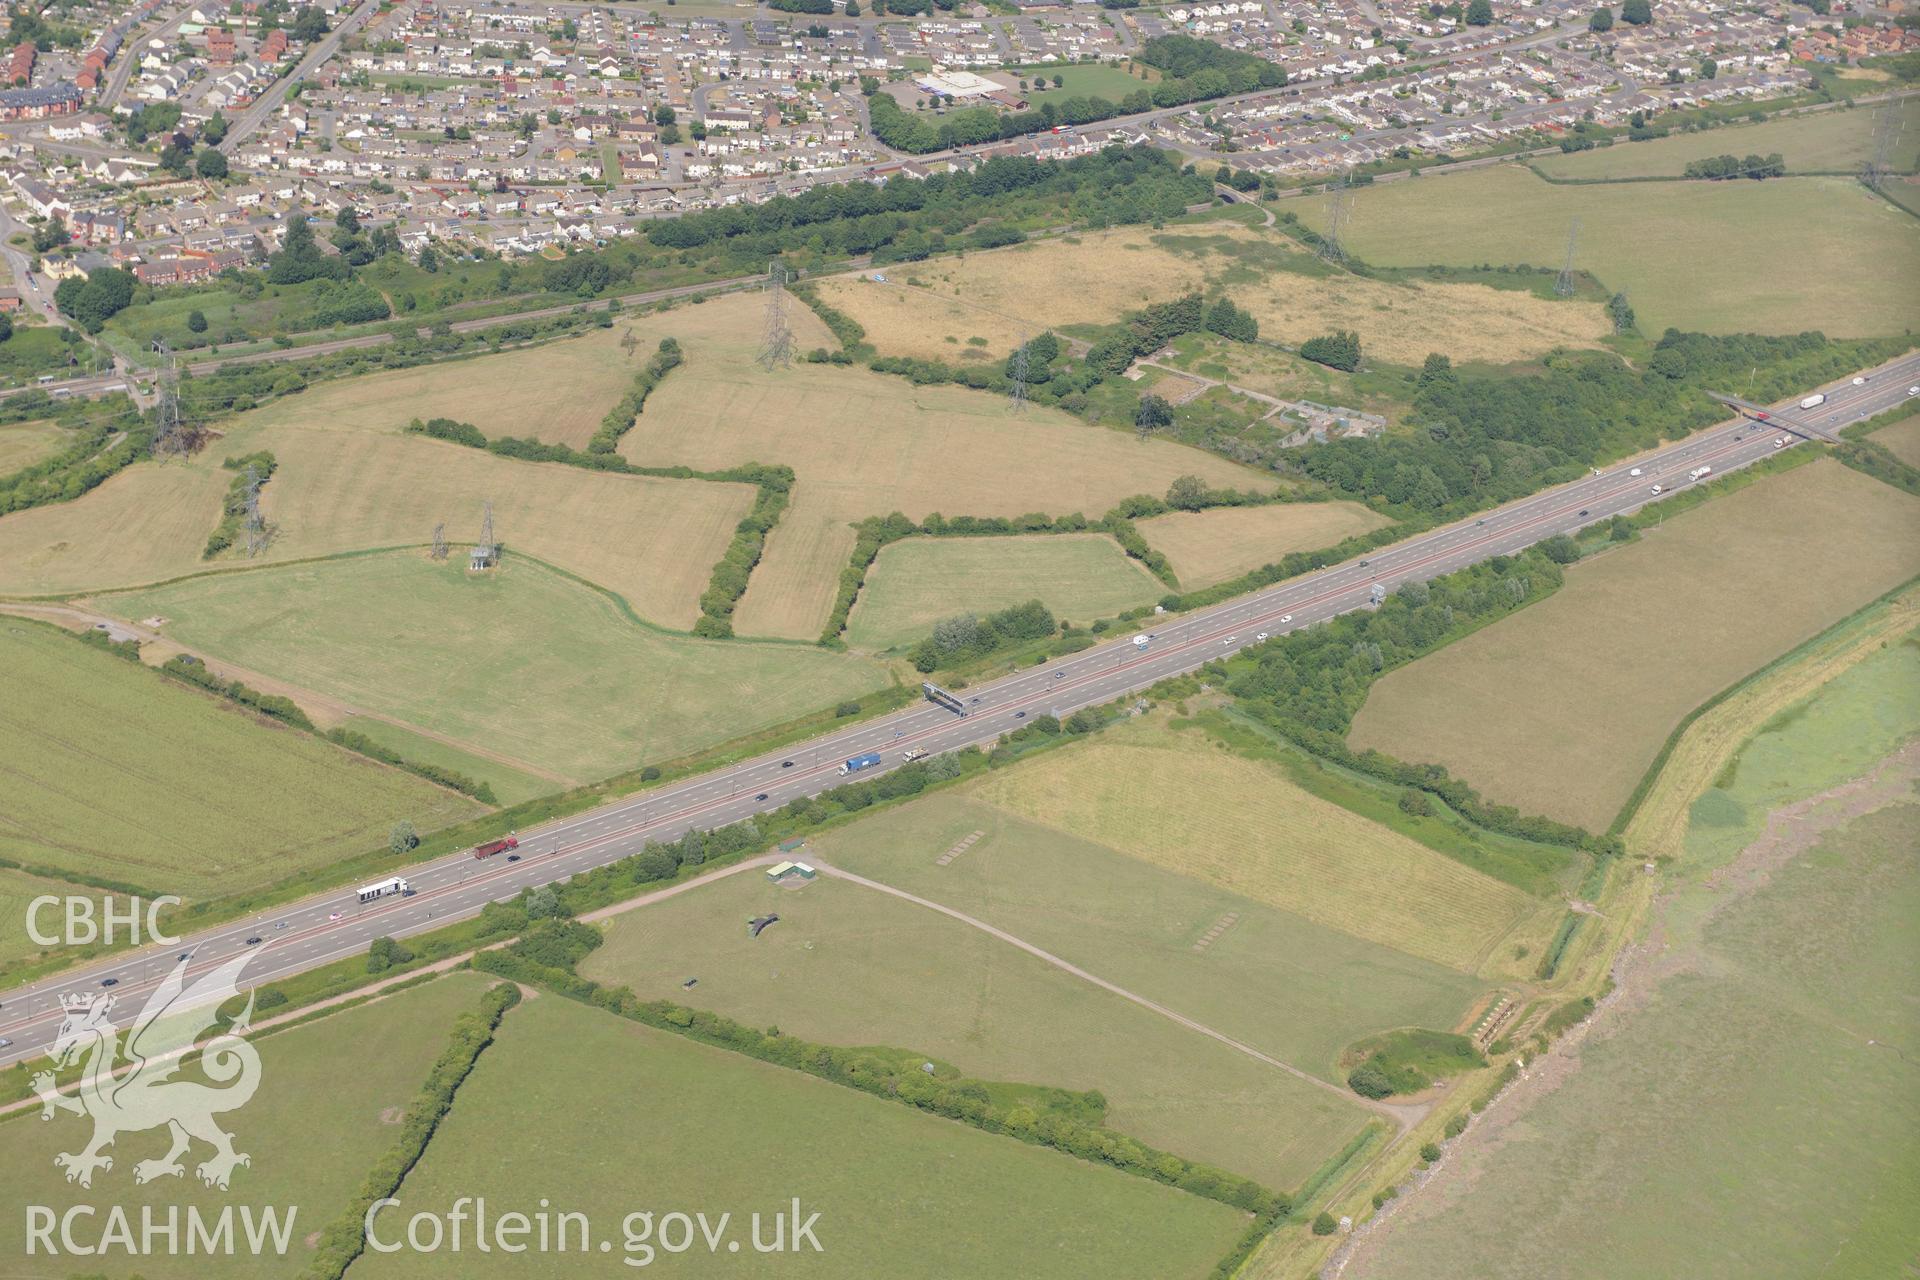 Caldicot level ridge & furrow, rifle range & M4 motorway section passing southern edge of Caldicot on way to 2nd Severn Crossing. Oblique aerial photograph taken during RCAHMW?s programme of archaeological aerial reconnaissance by Toby Driver 01/08/2013.